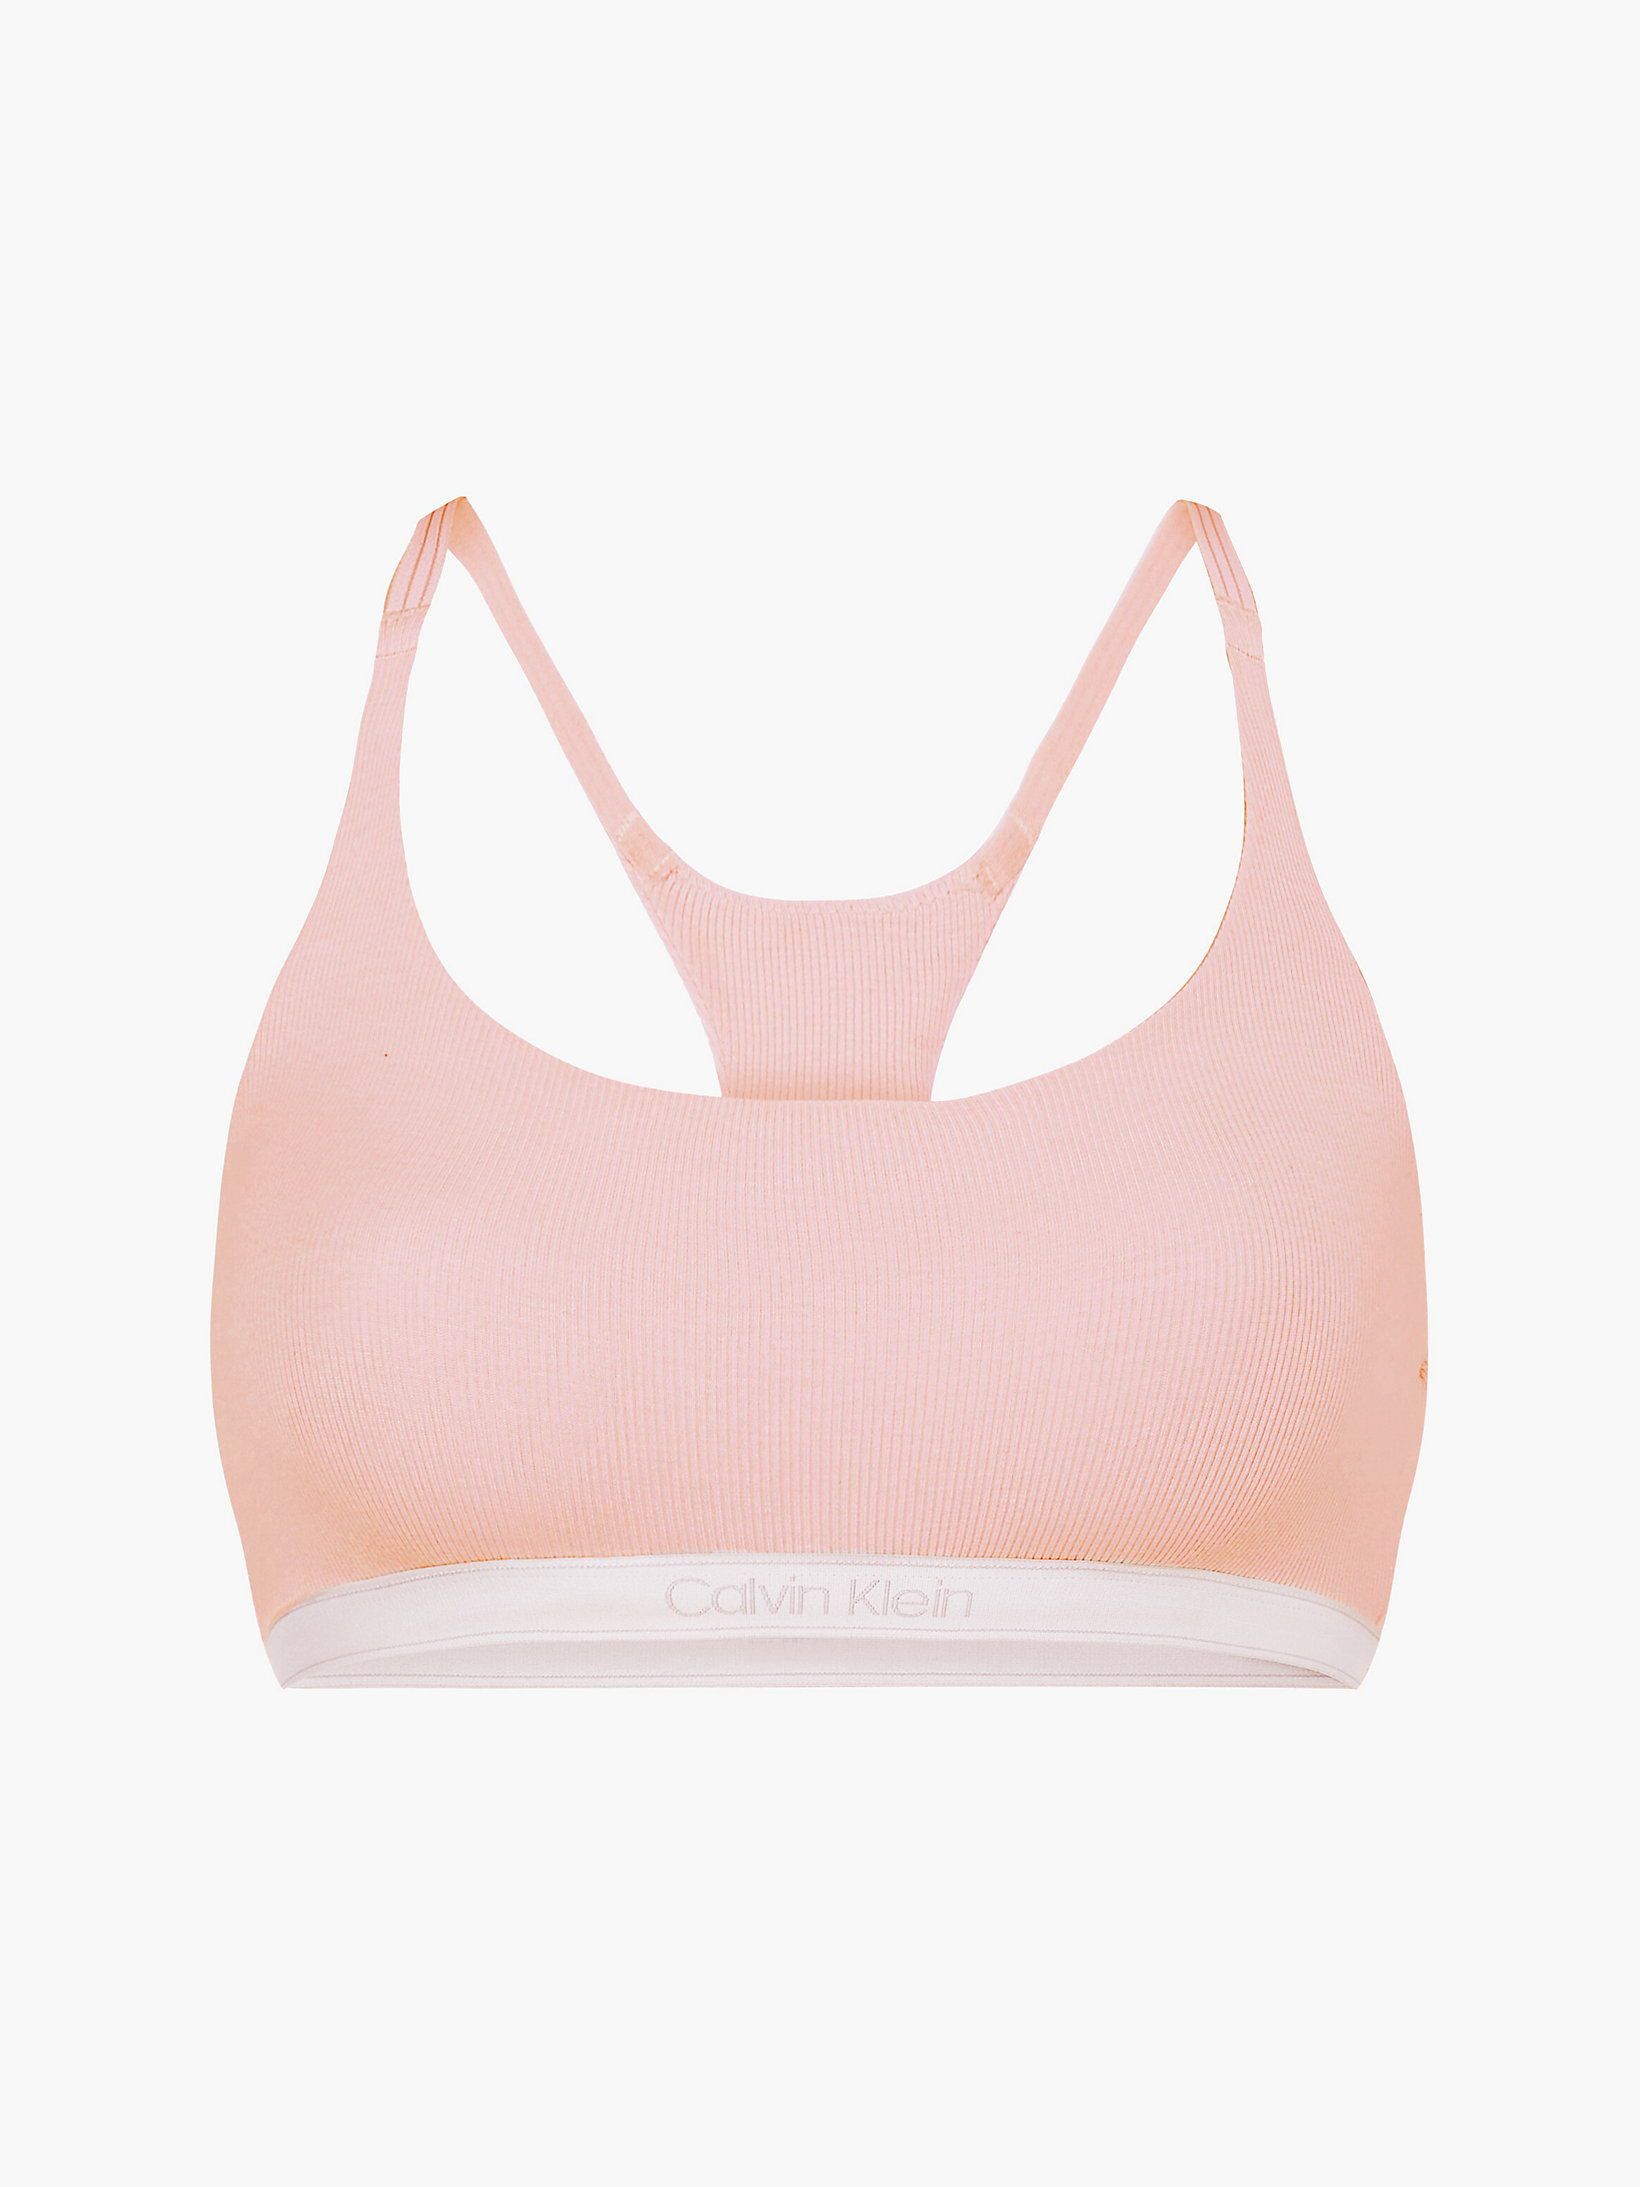 Barely Pink Bralette - Pure Ribbed undefined women Calvin Klein